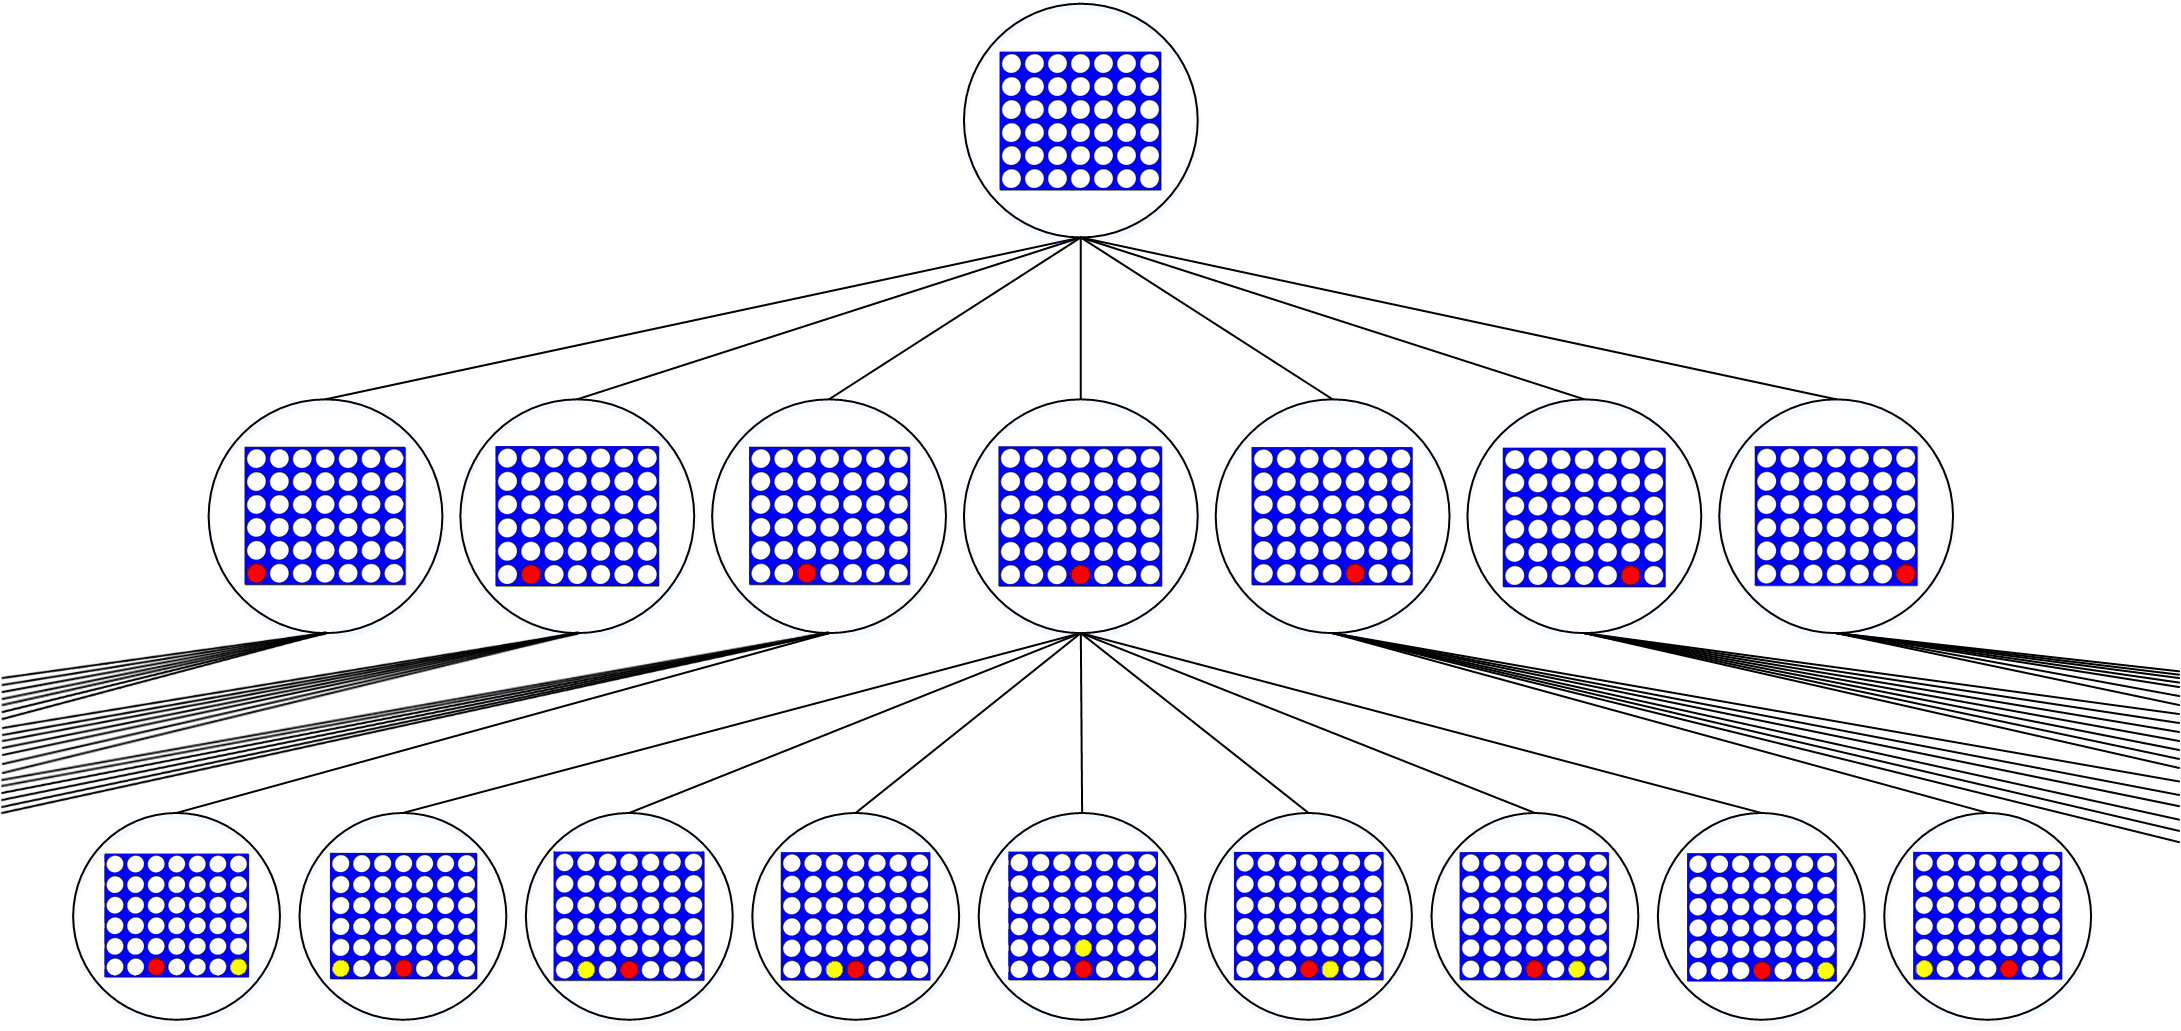 Decision Tree of Connect4